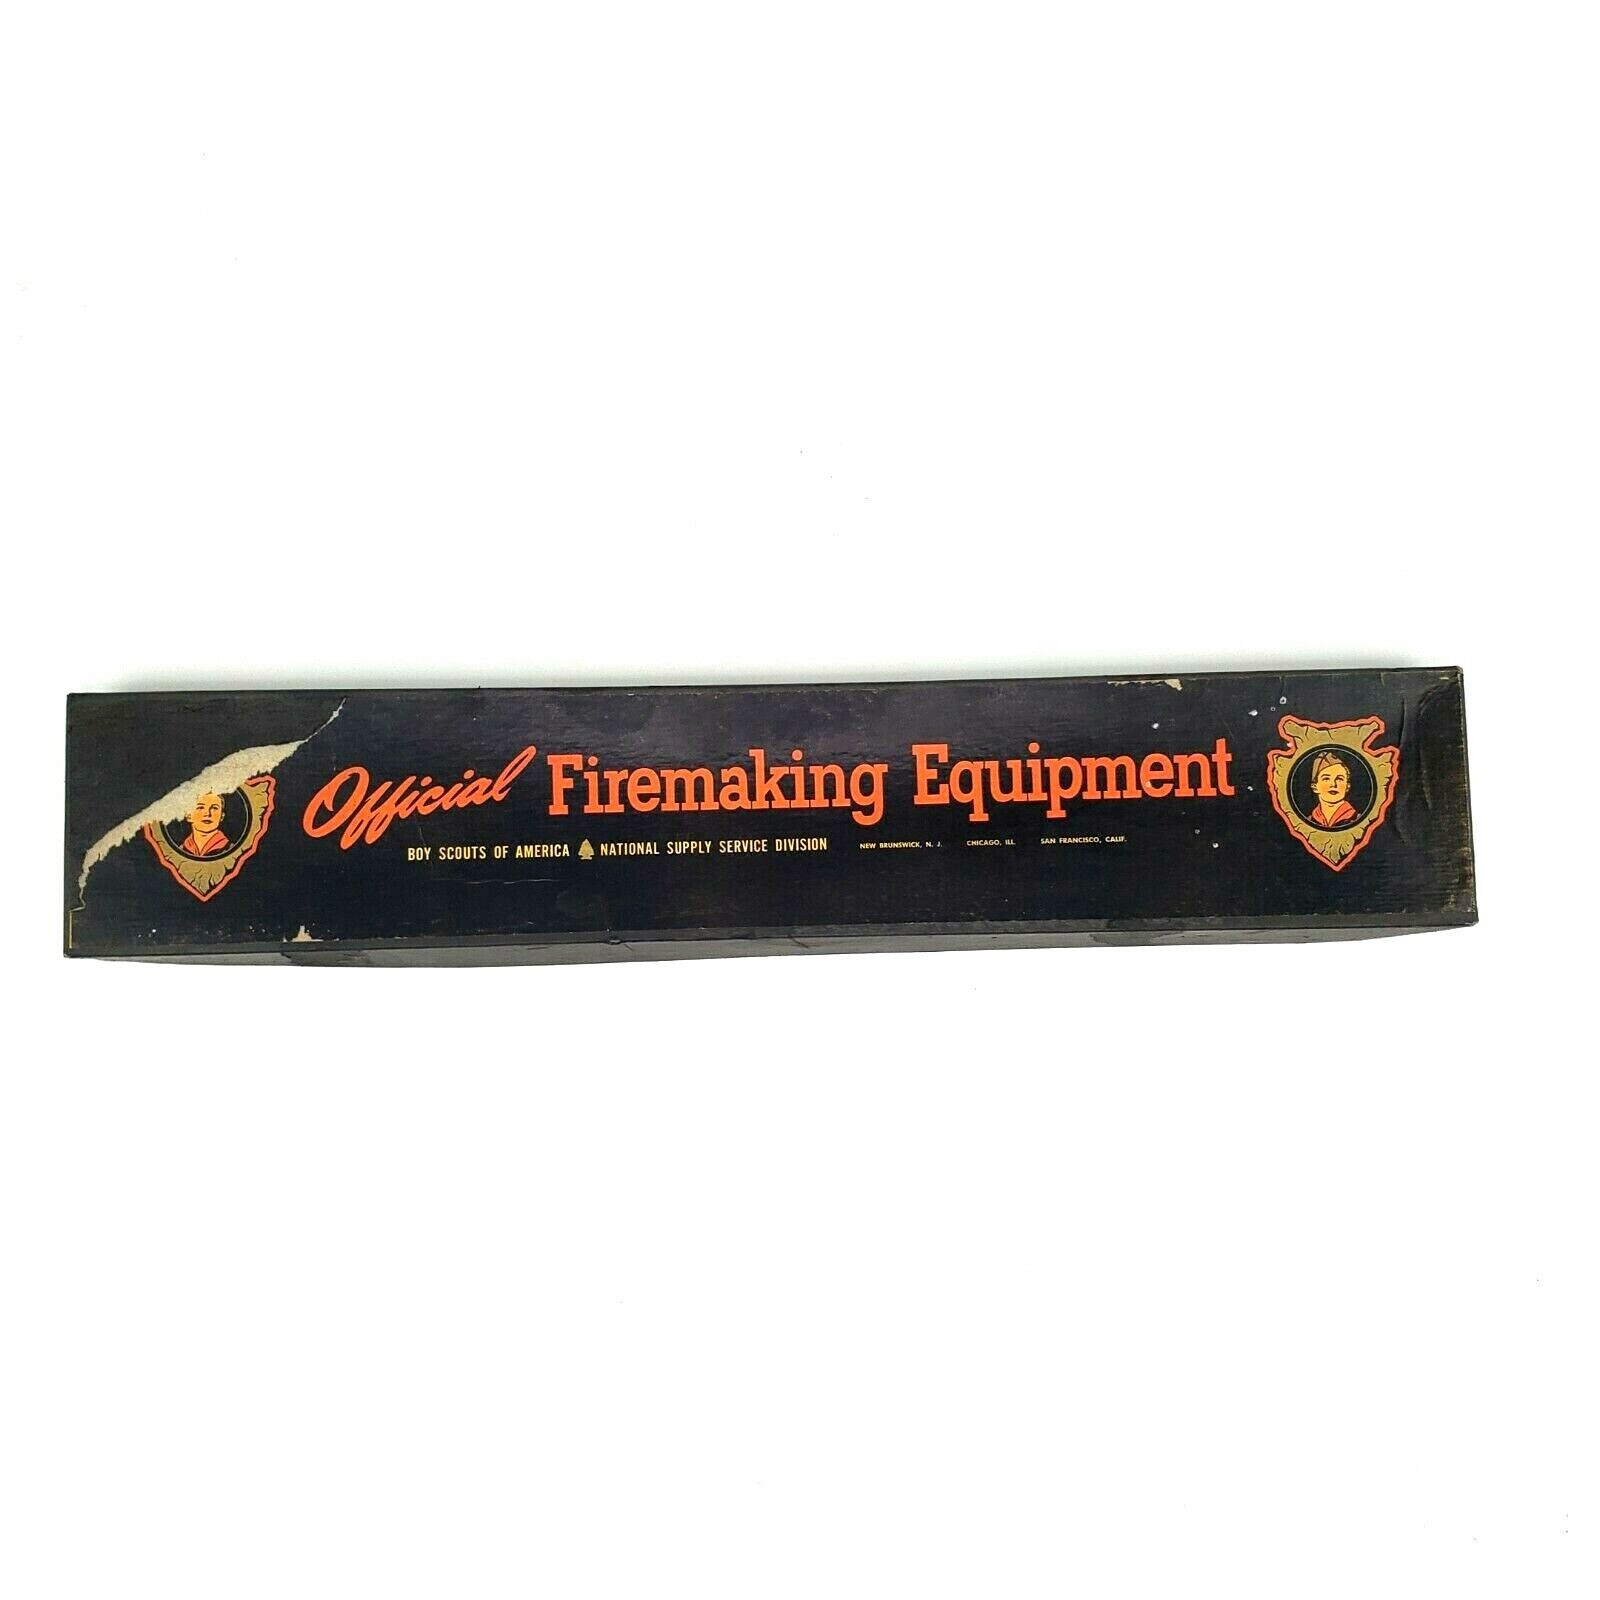 Boy Scouts of America Official Firemaking Equipment Box